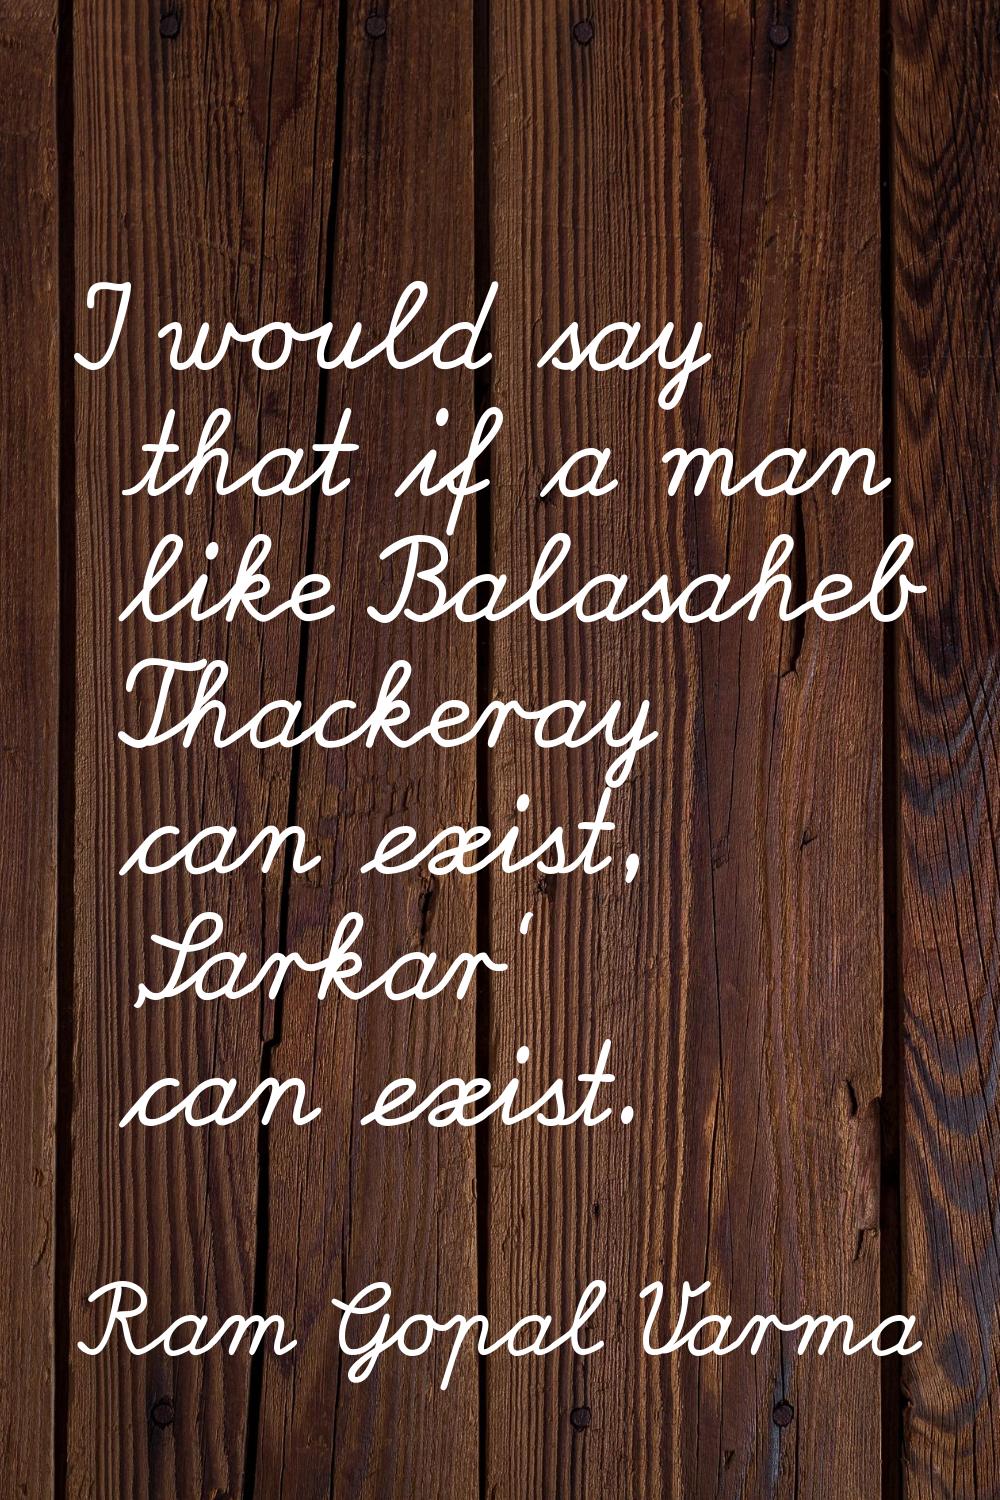 I would say that if a man like Balasaheb Thackeray can exist, 'Sarkar' can exist.